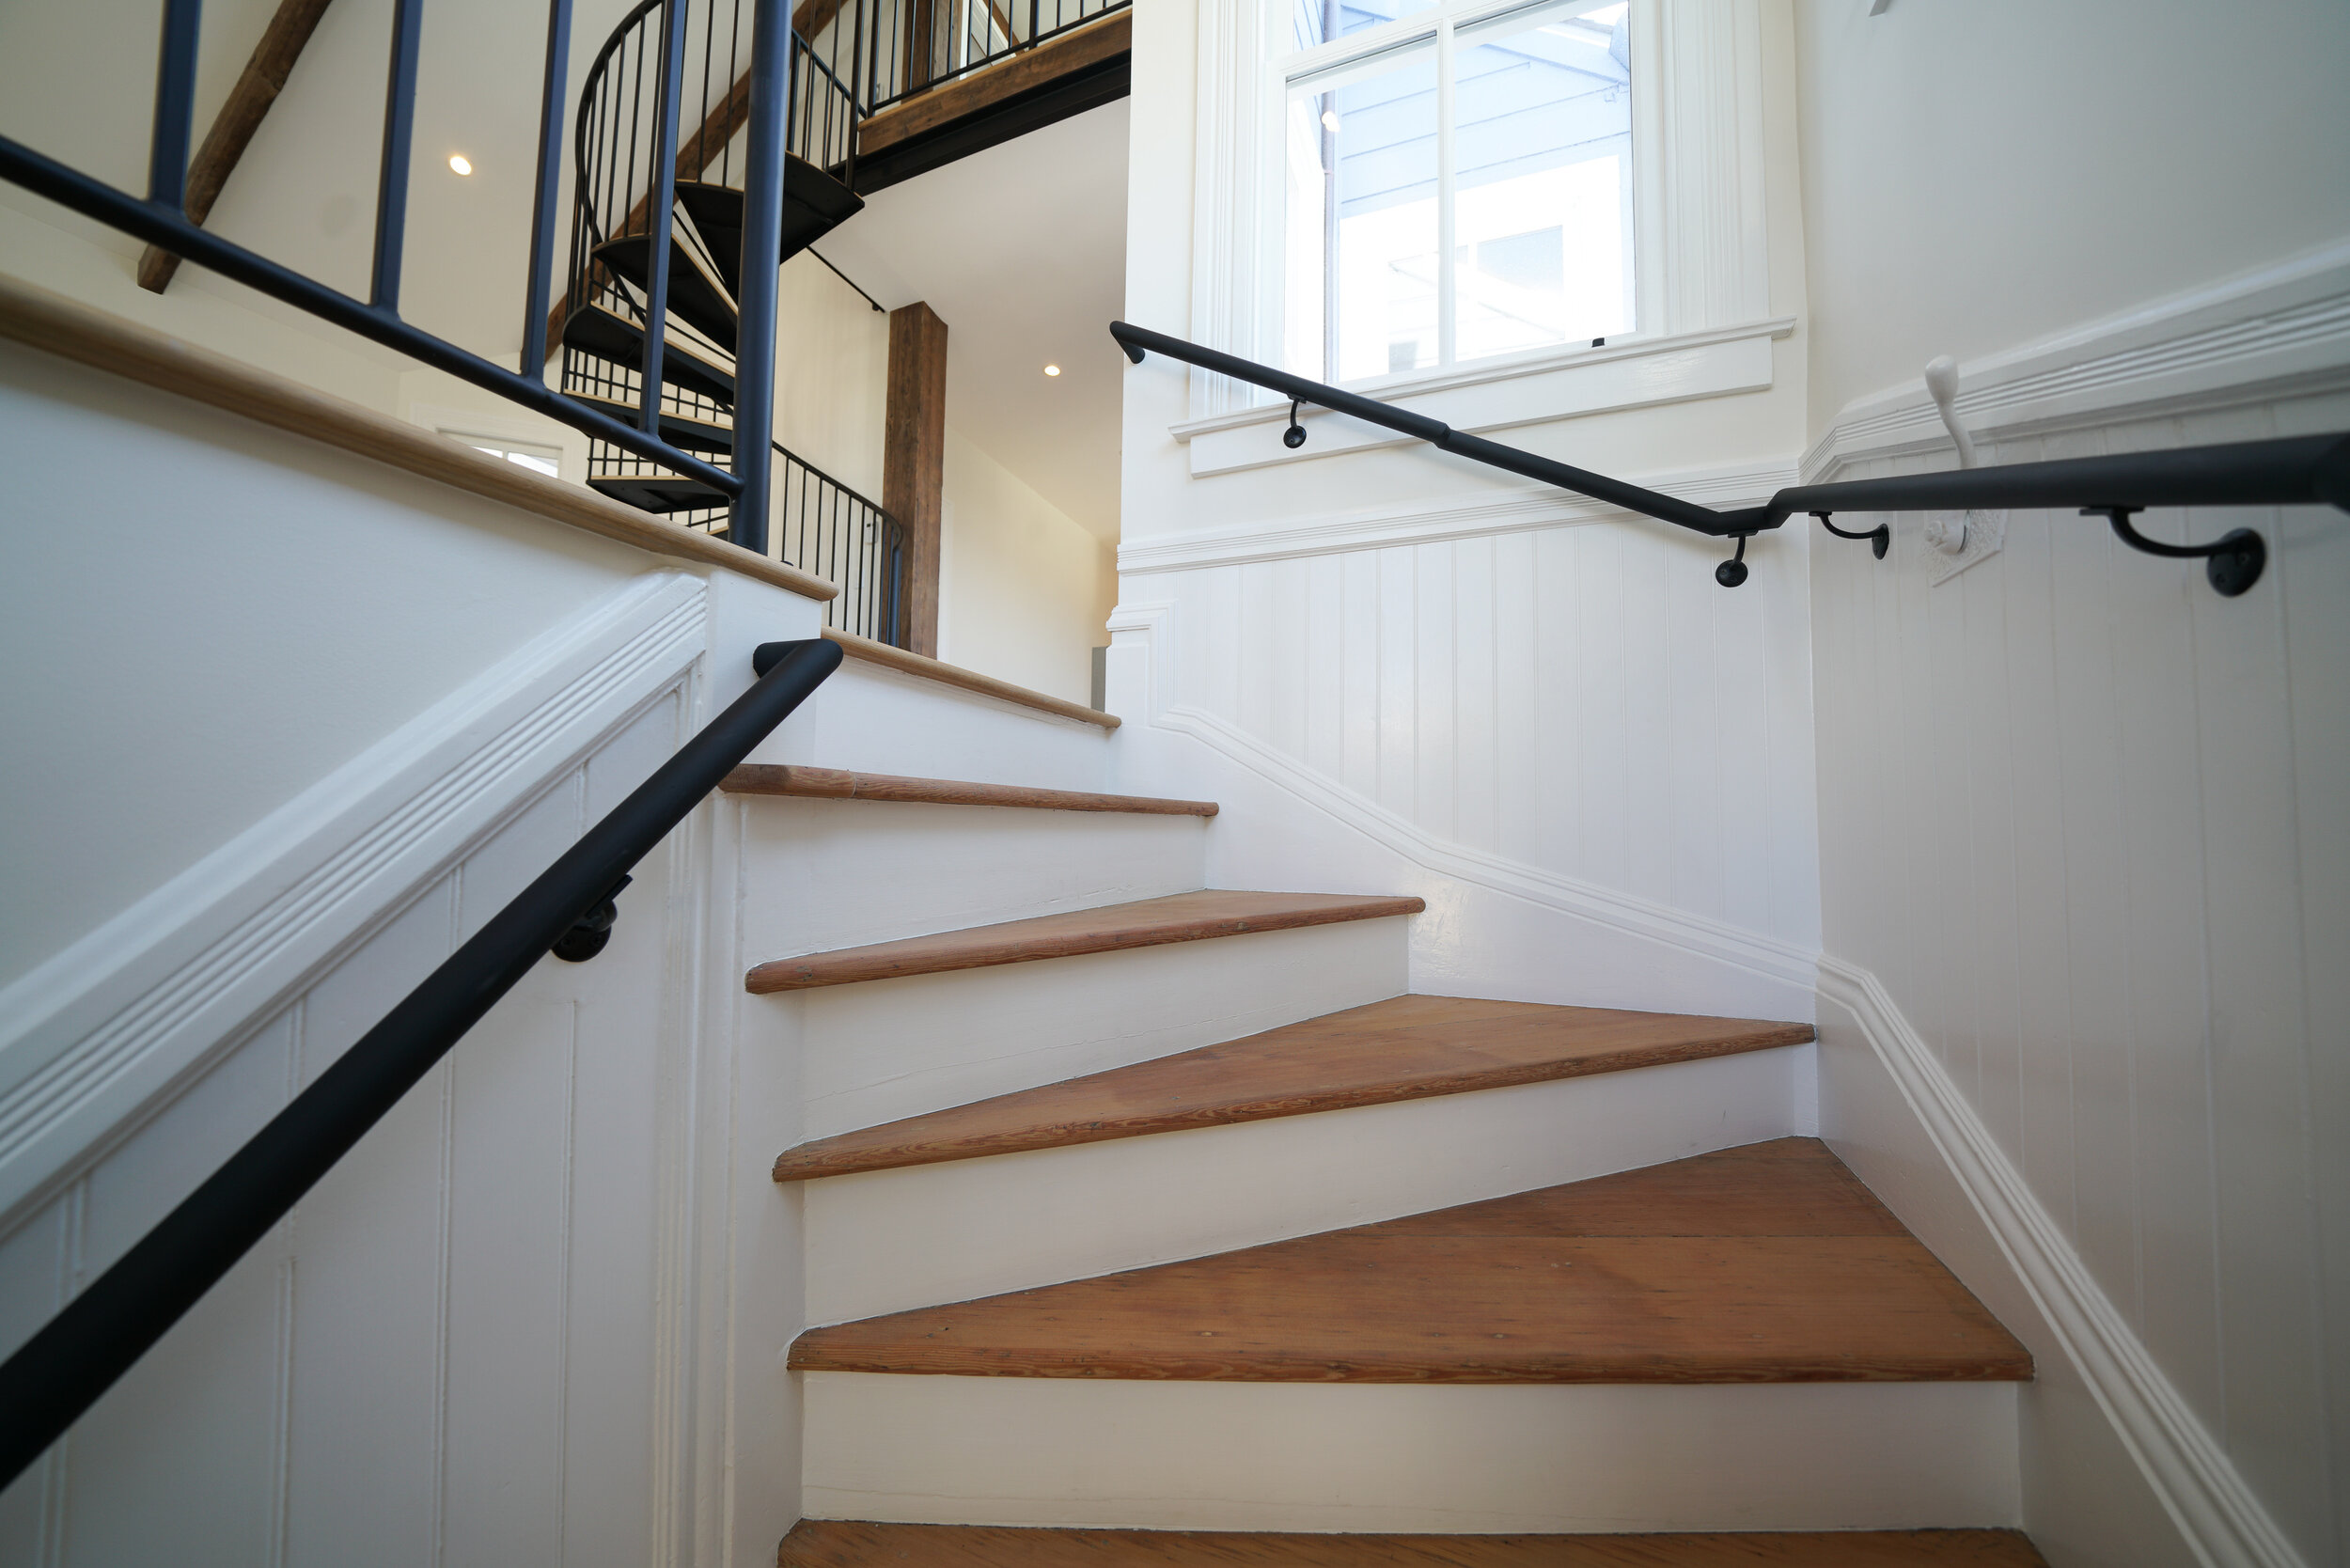 Winder stairs by Outerlands Design